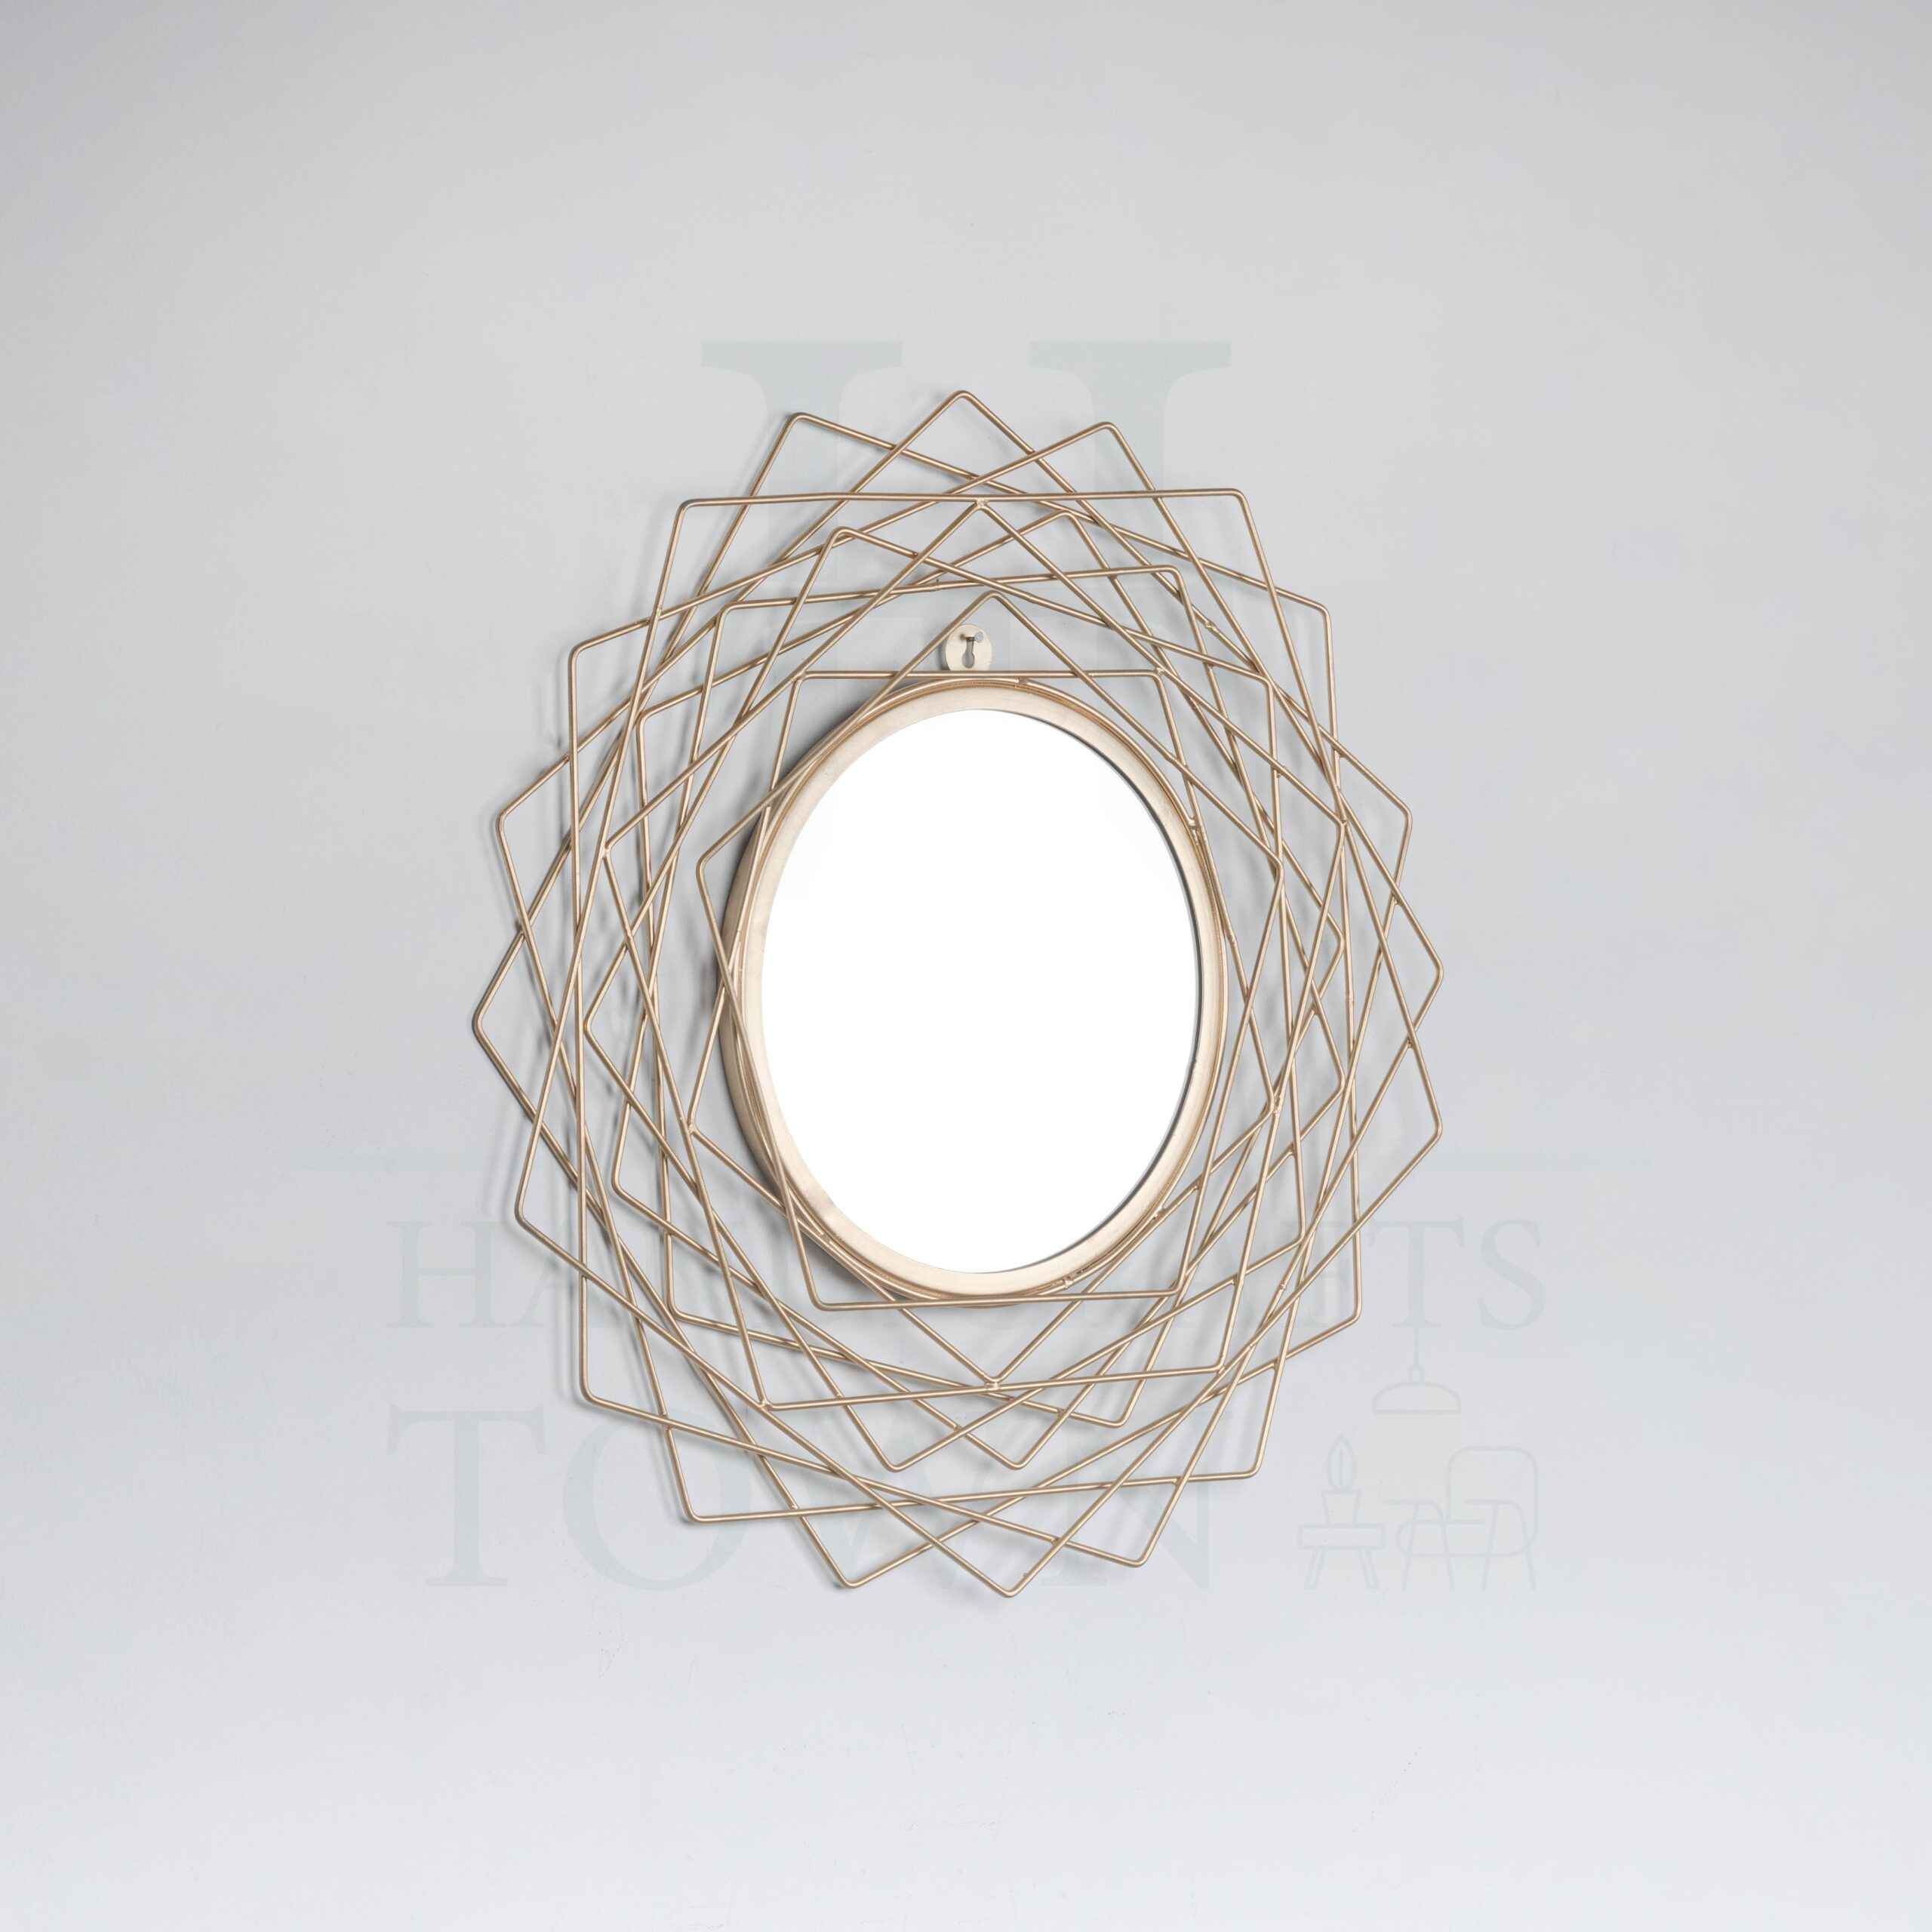 Nested Round Side Tables